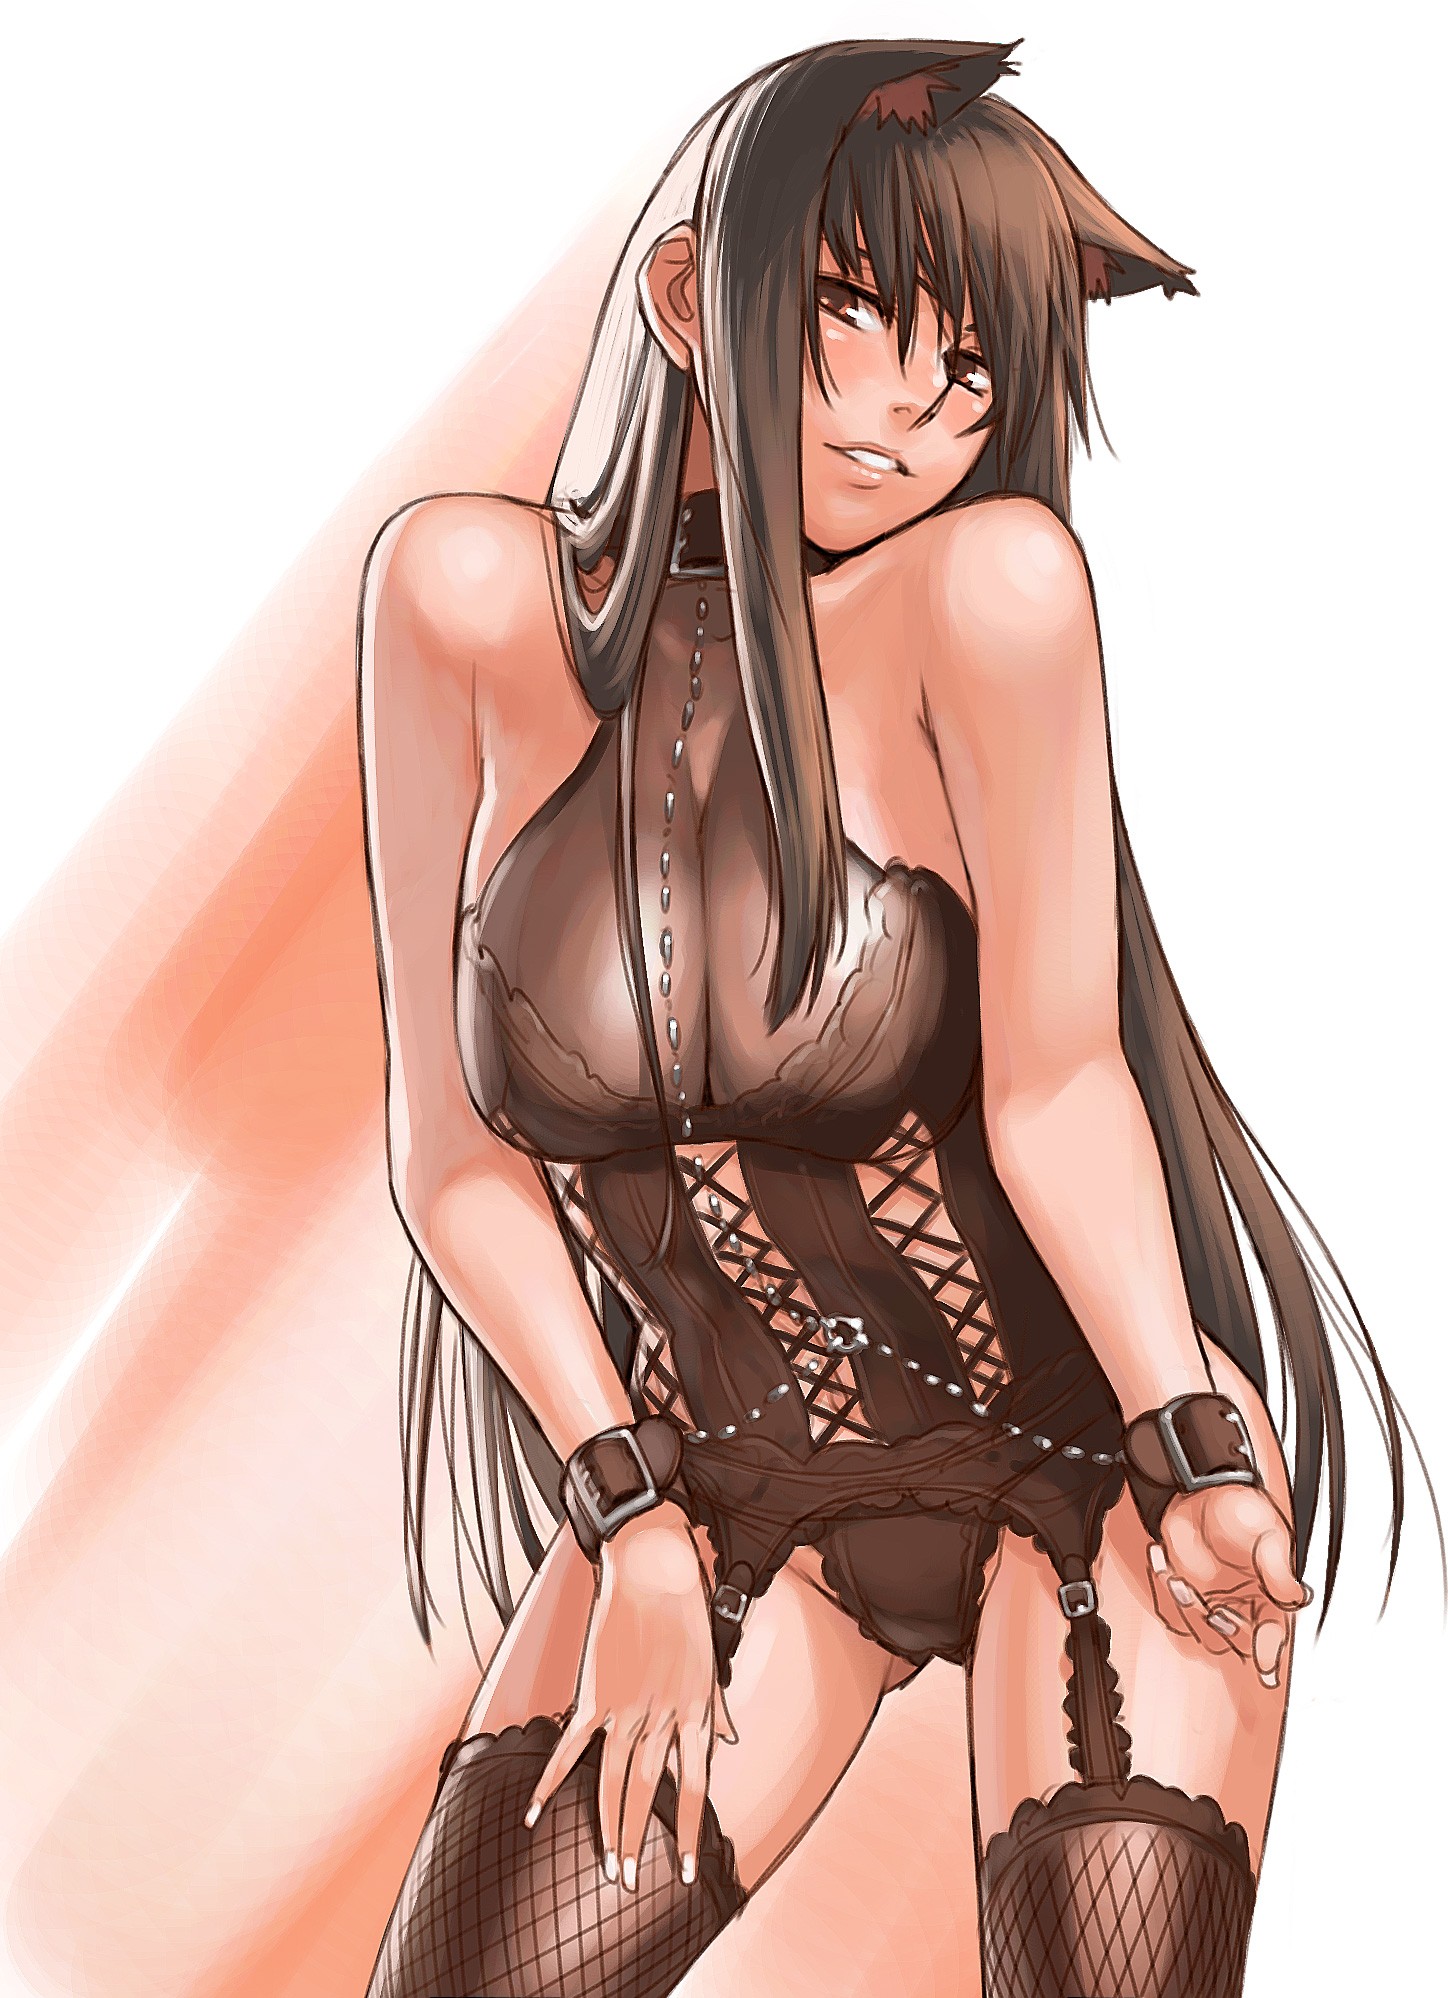 Anime 1448x1998 anime girls animal ears cat girl collar boobs big boobs women anime lingerie black lingerie black underwear panties stockings portrait display looking at viewer curvy bare shoulders corset thigh-highs parted lips Azusa brunette cat ears cleavage long hair handcuffs